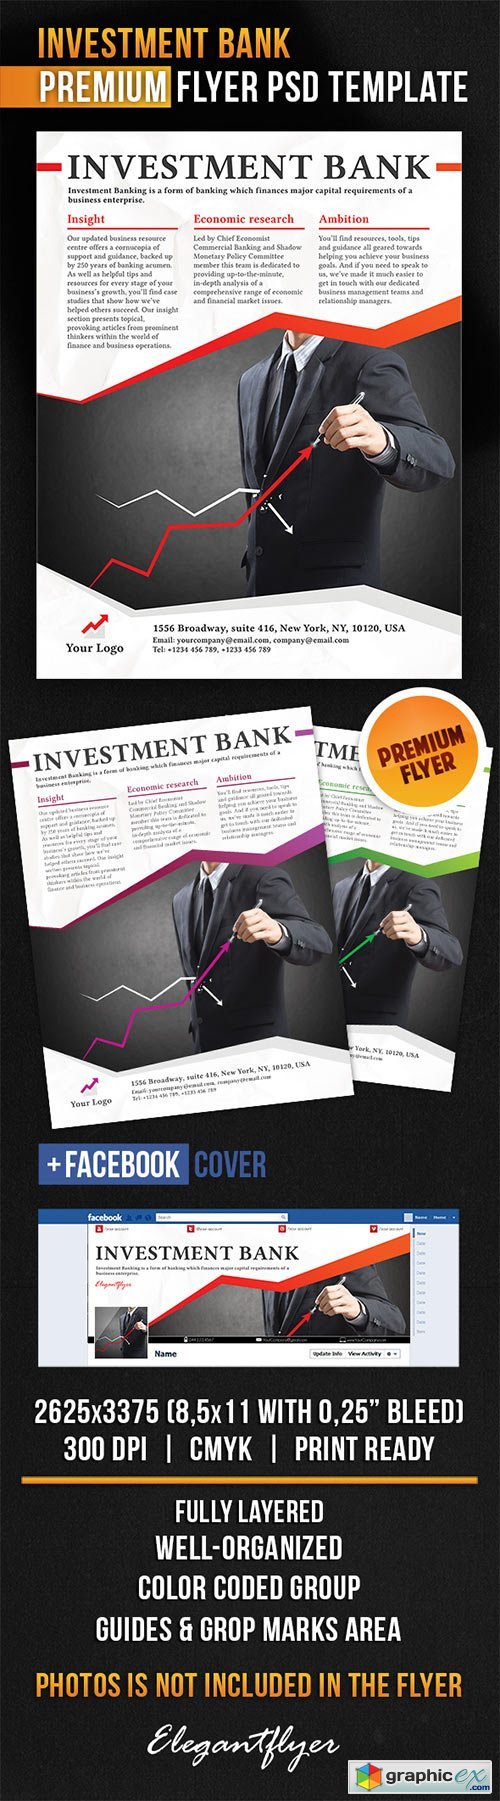 Investment Bank Flyer PSD Template + Facebook Cover